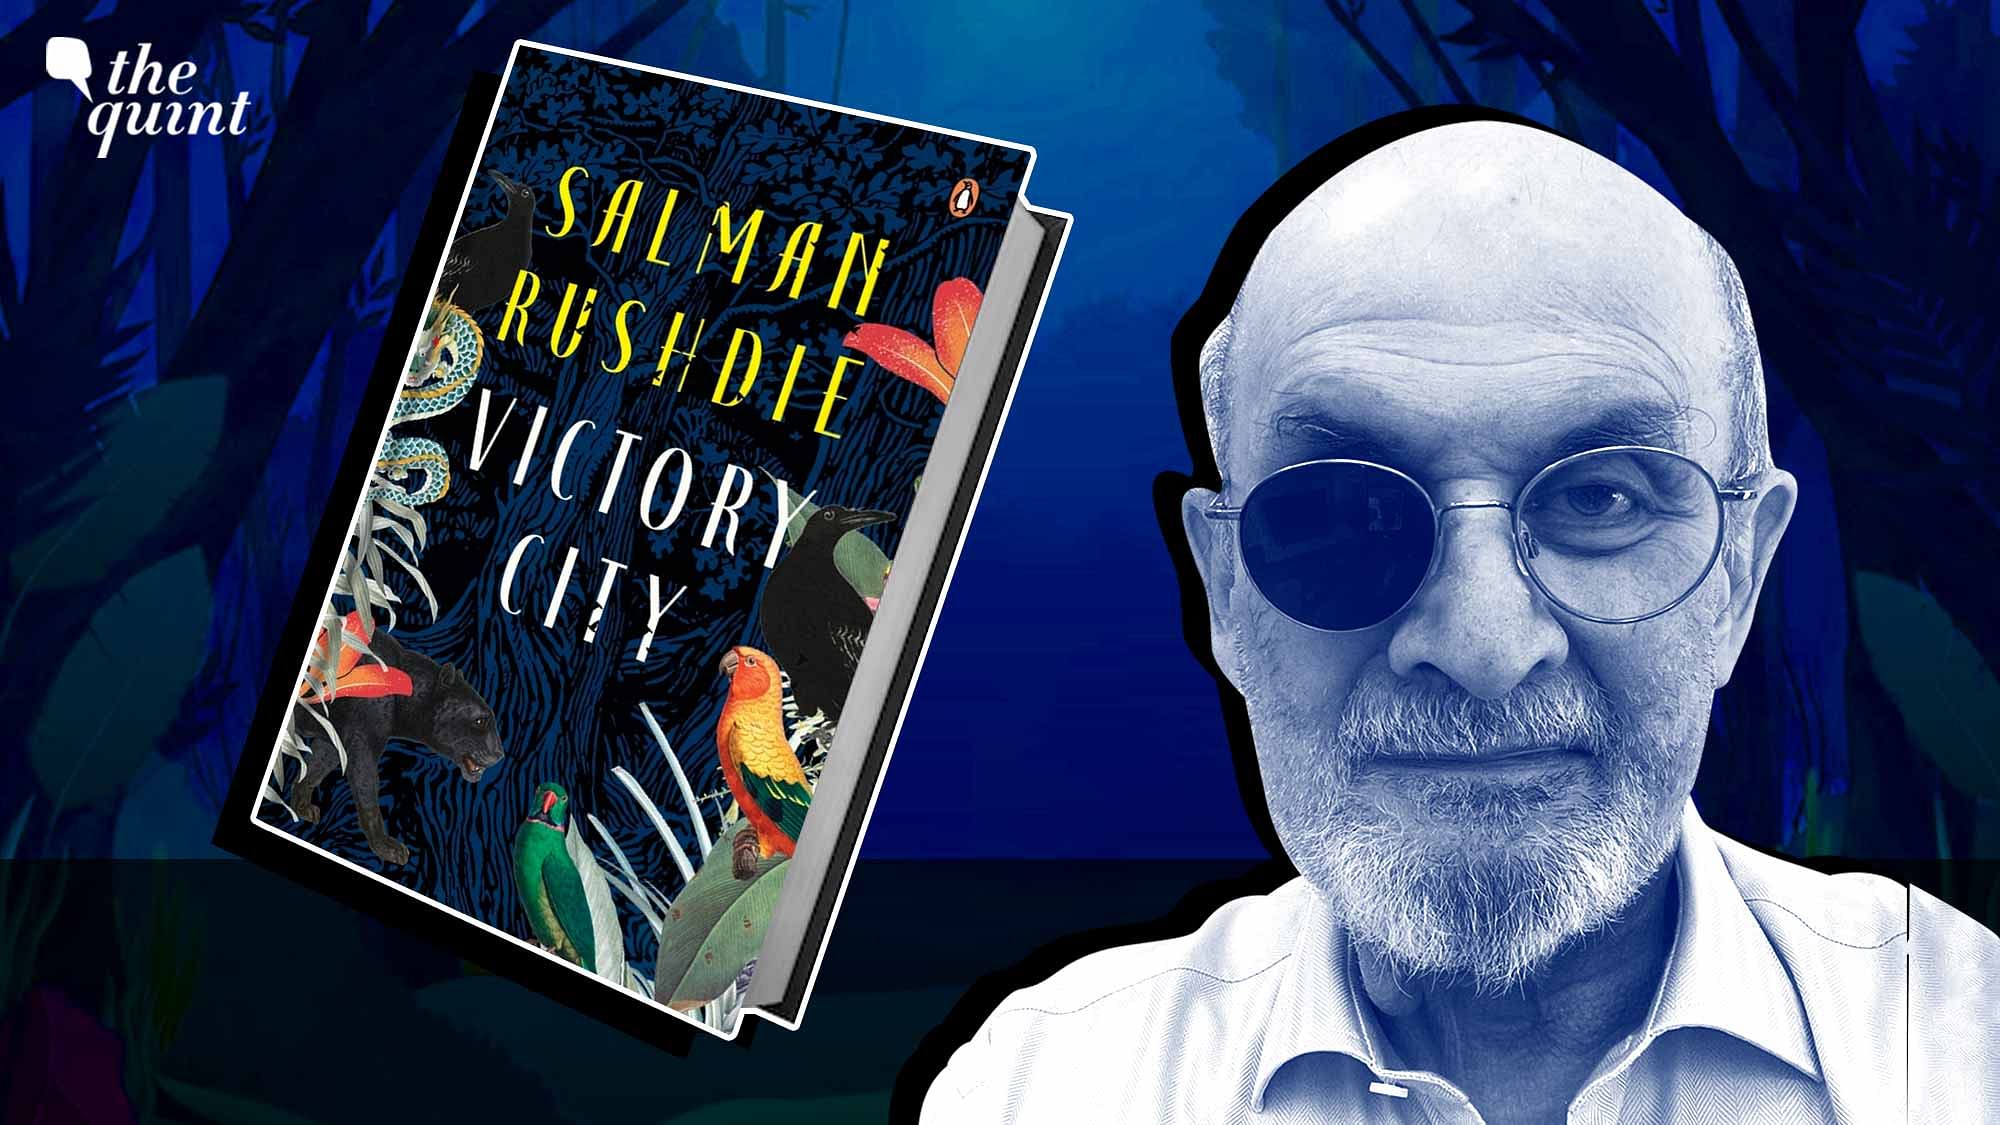 <div class="paragraphs"><p><em>Victory City</em> has come with a chip on its shoulder—Rushdie’s first novel after a near-fatal stabbing in a New York event.</p></div>